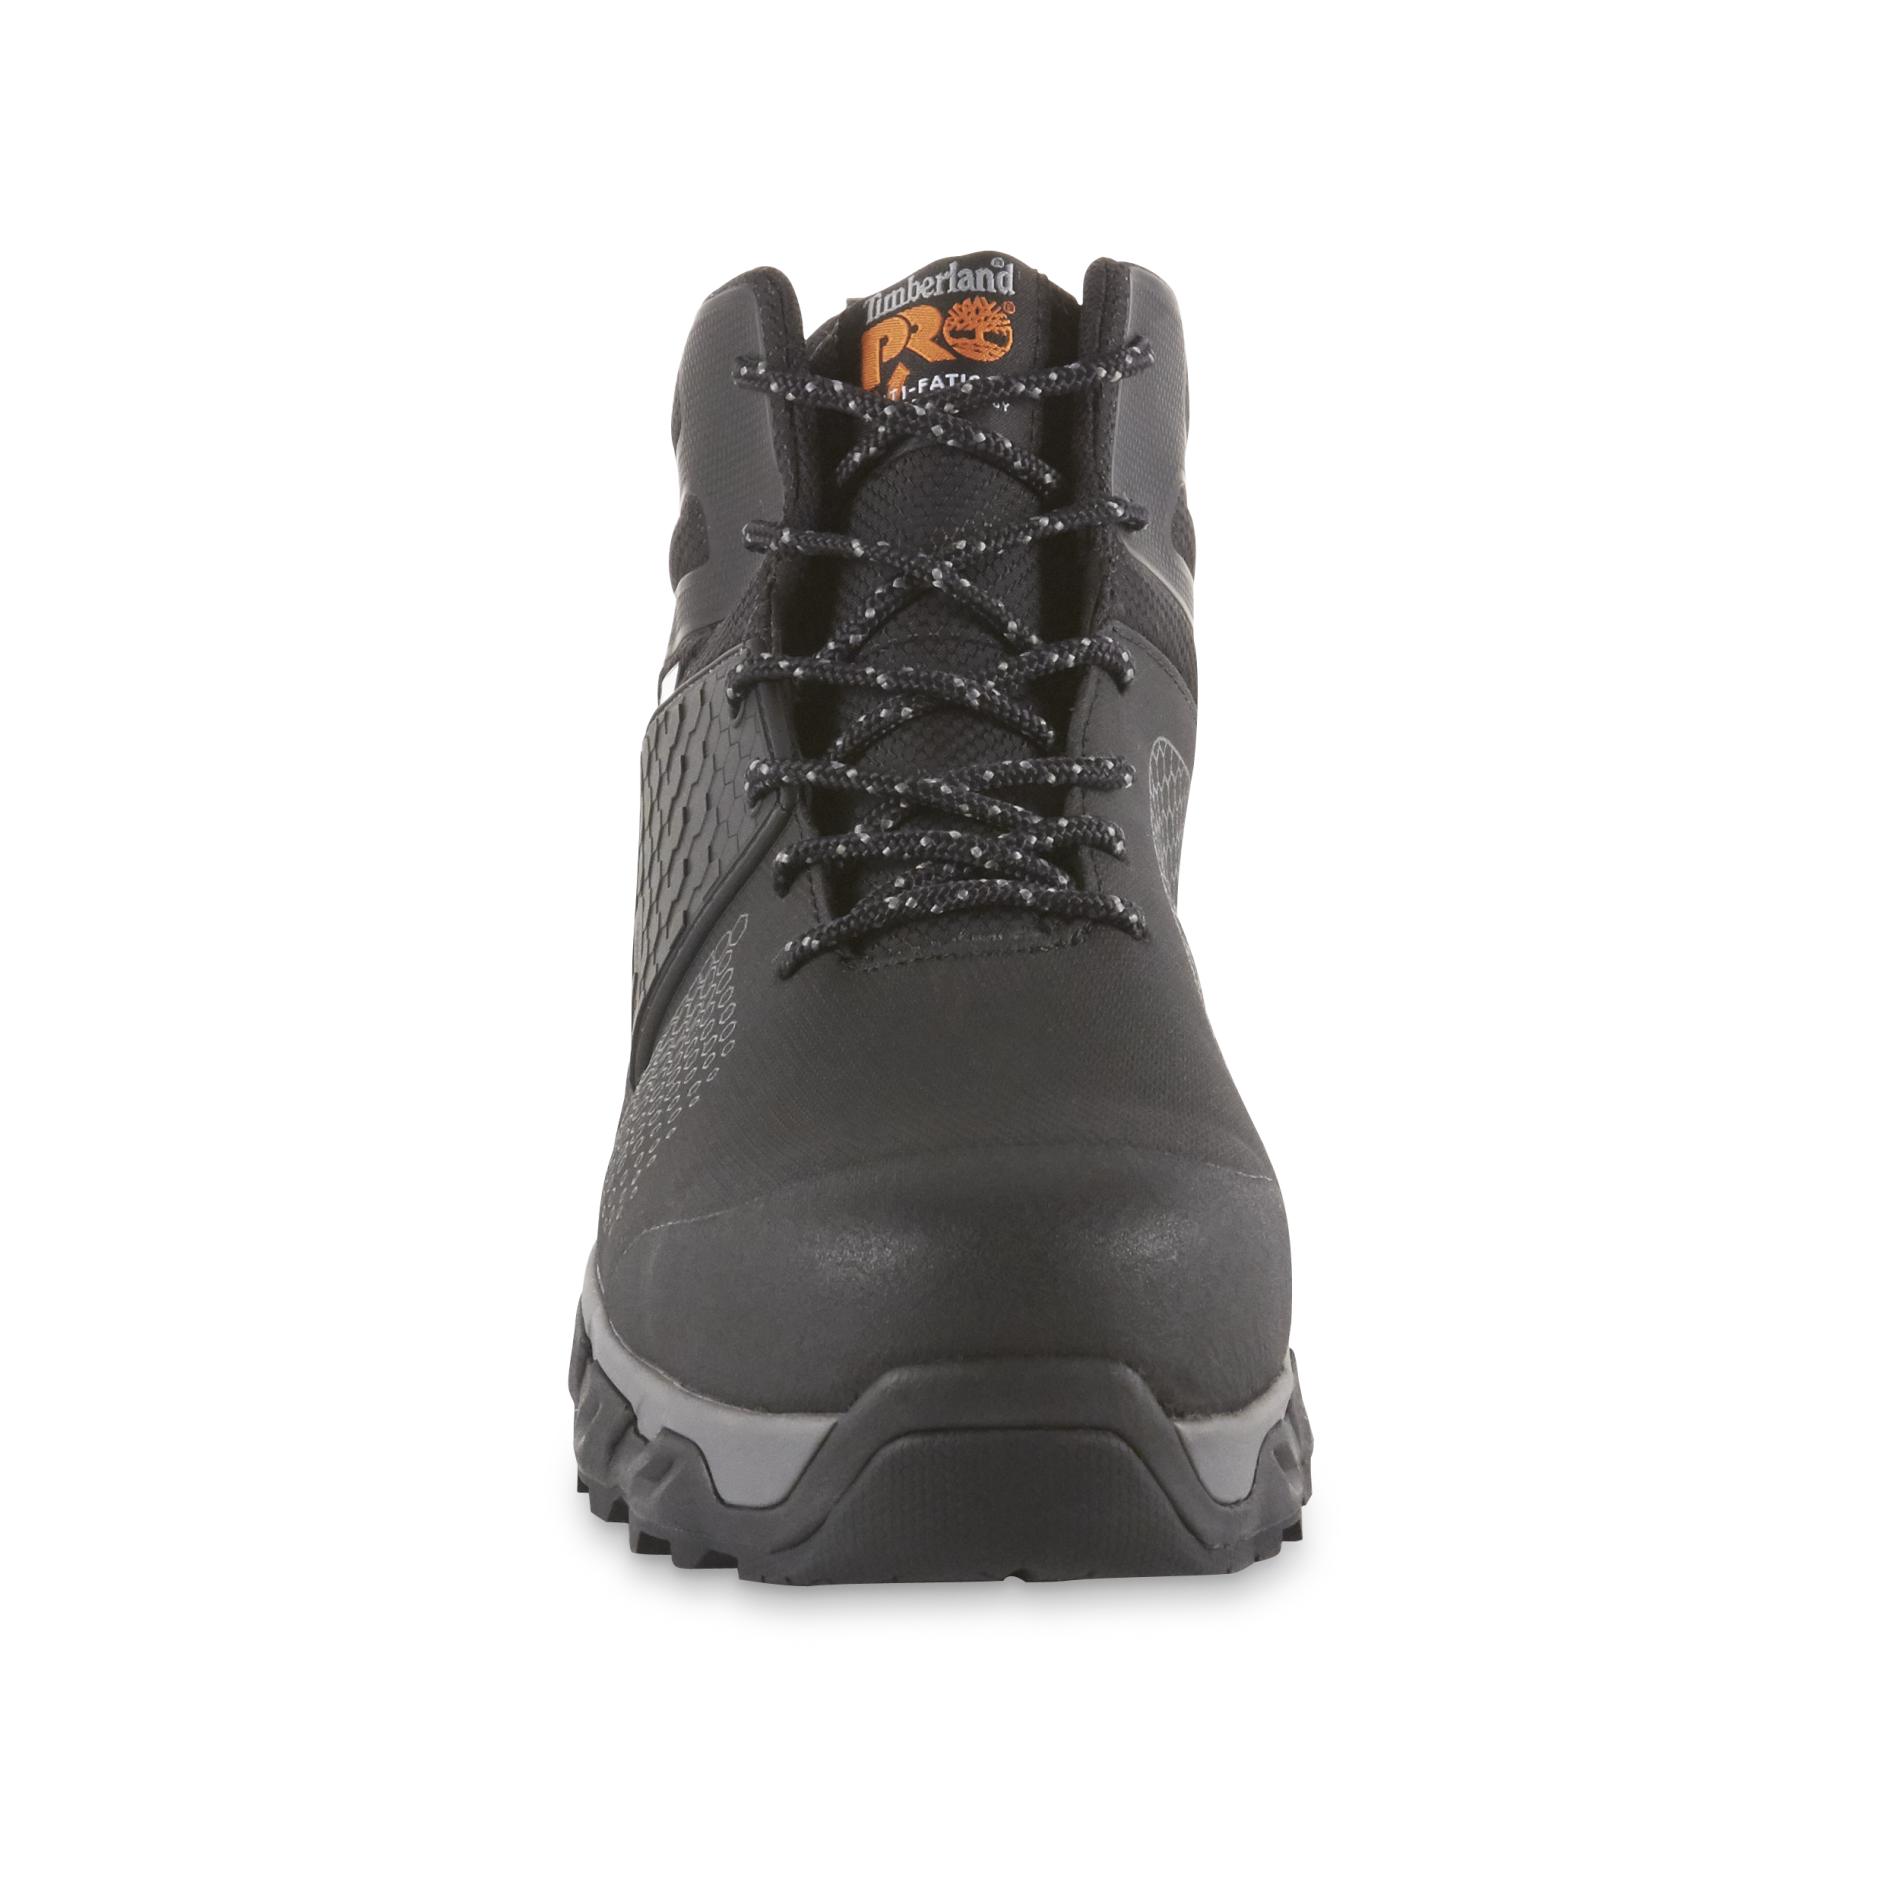 timberland pro work boots sears